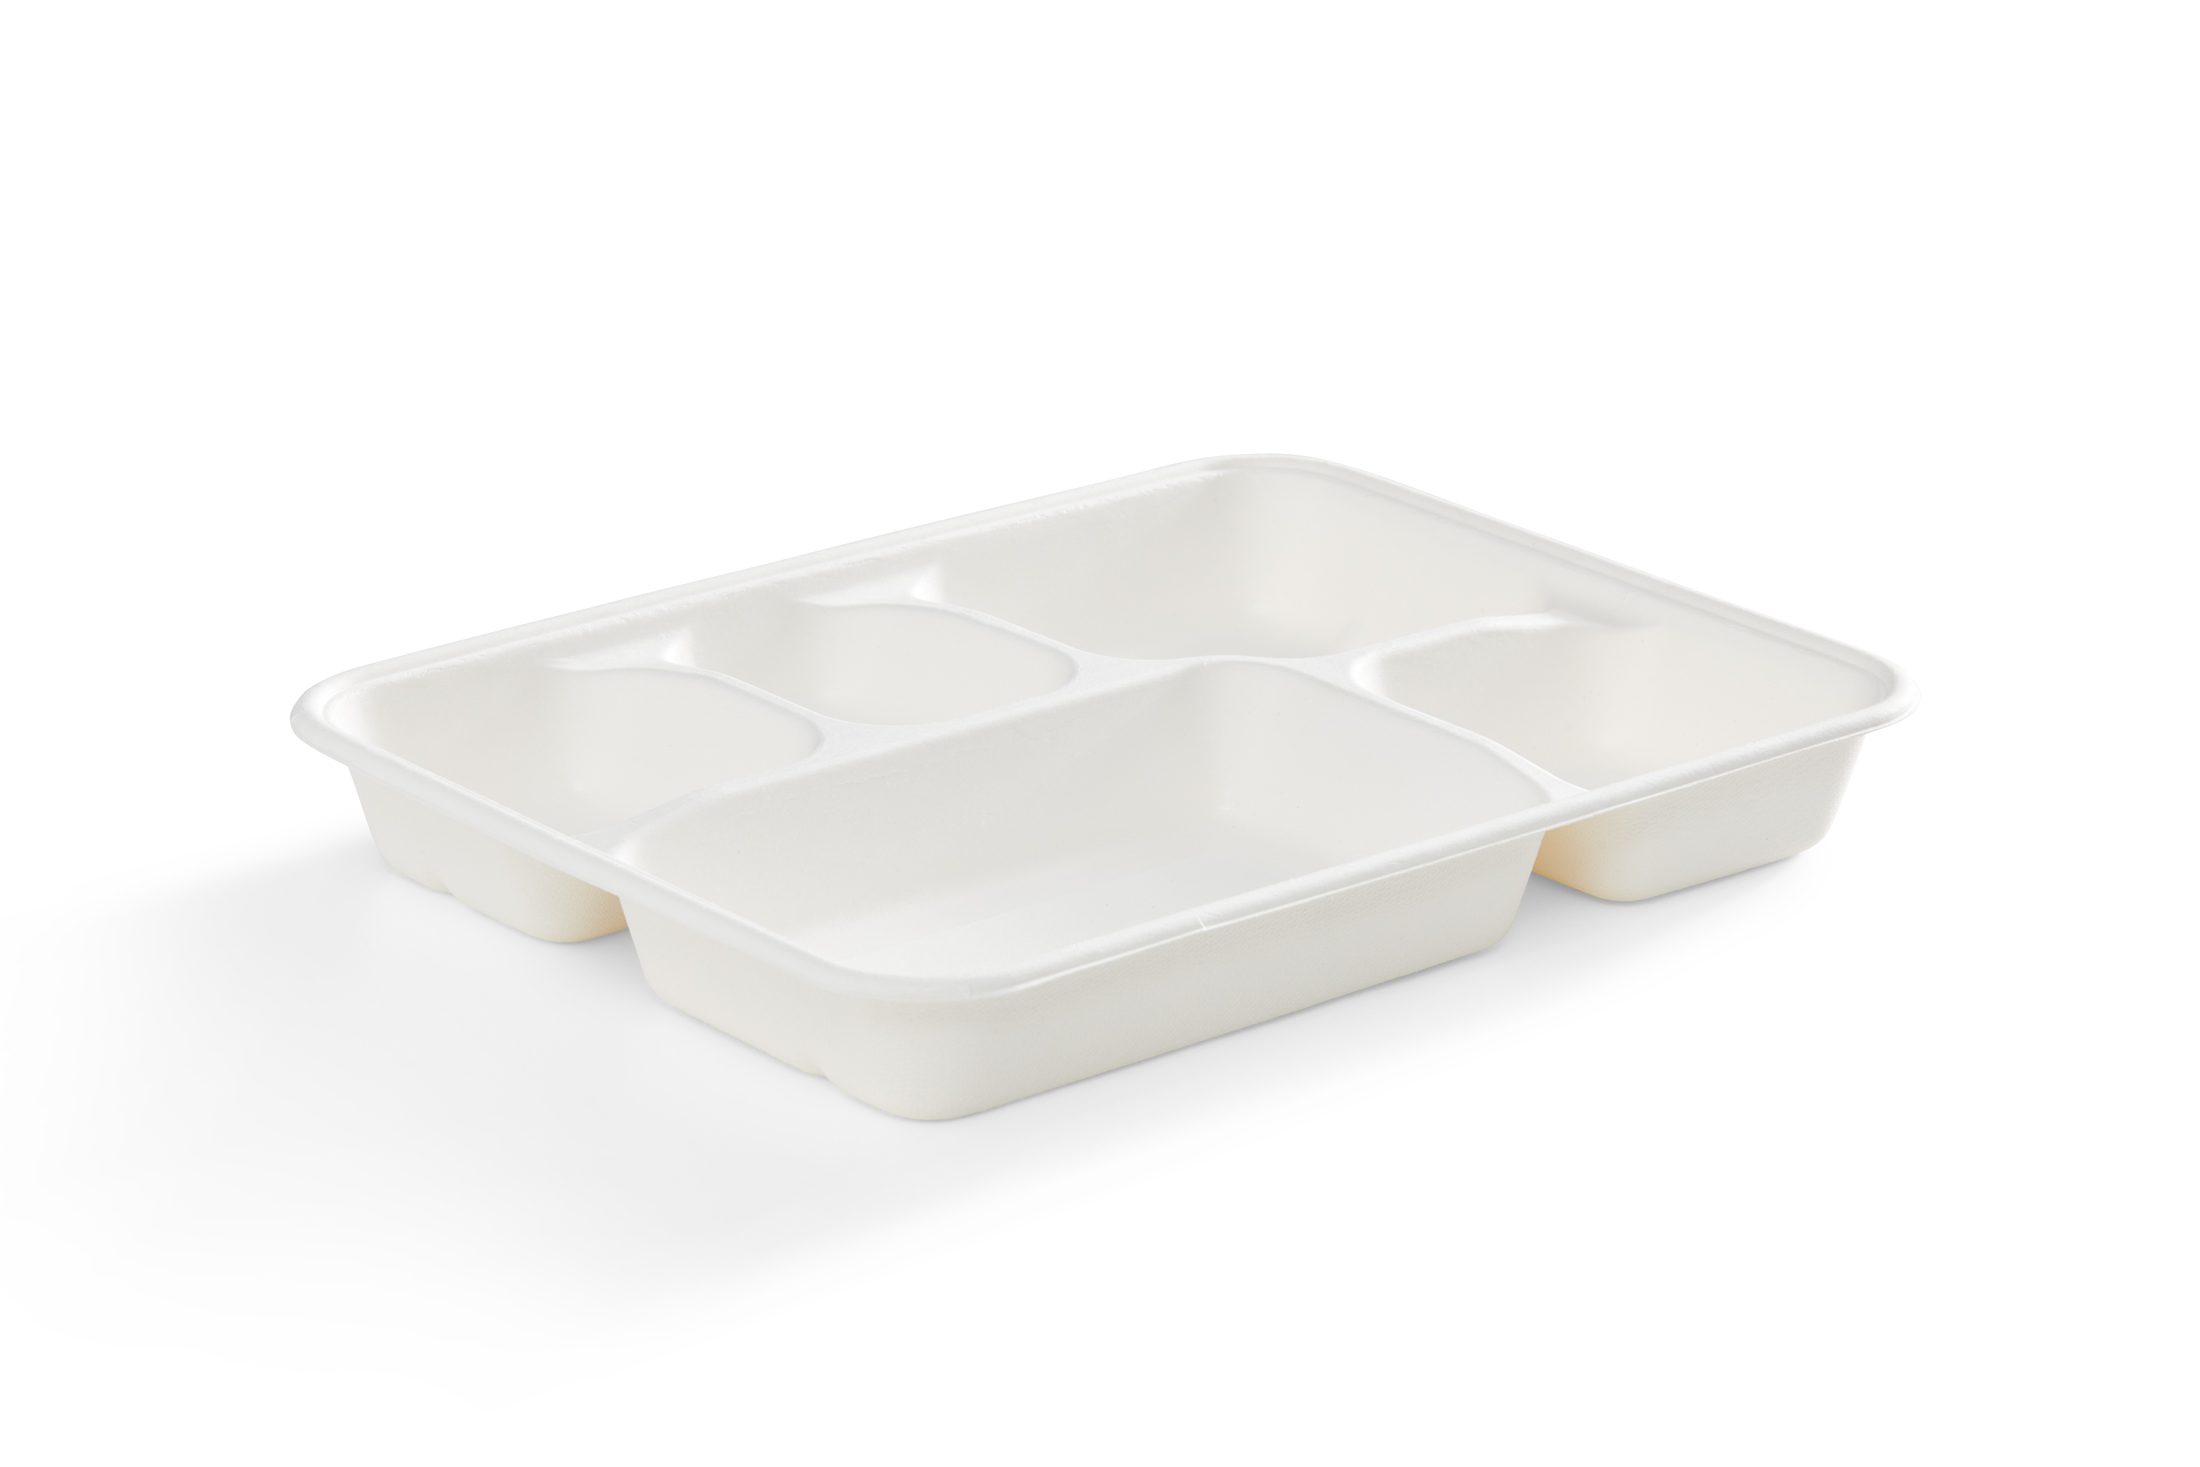 GoEco, Disposable, 5CP, Rectangular, Baggase, Meal Trays, Pack of 300